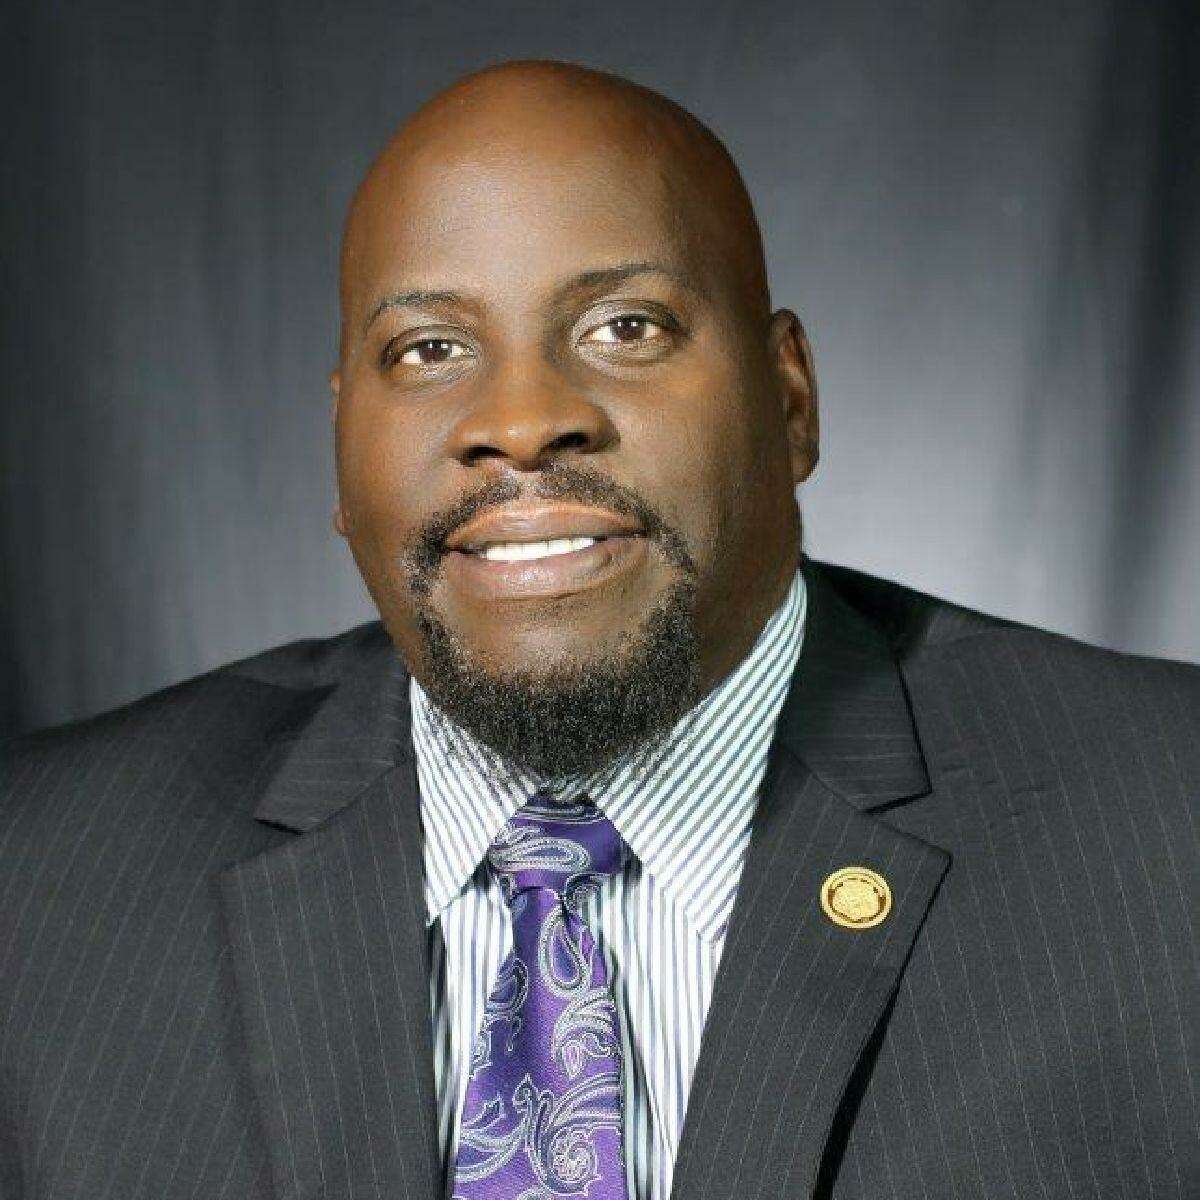 Dwayne Smith is the new CEO of Housatonic Community College.